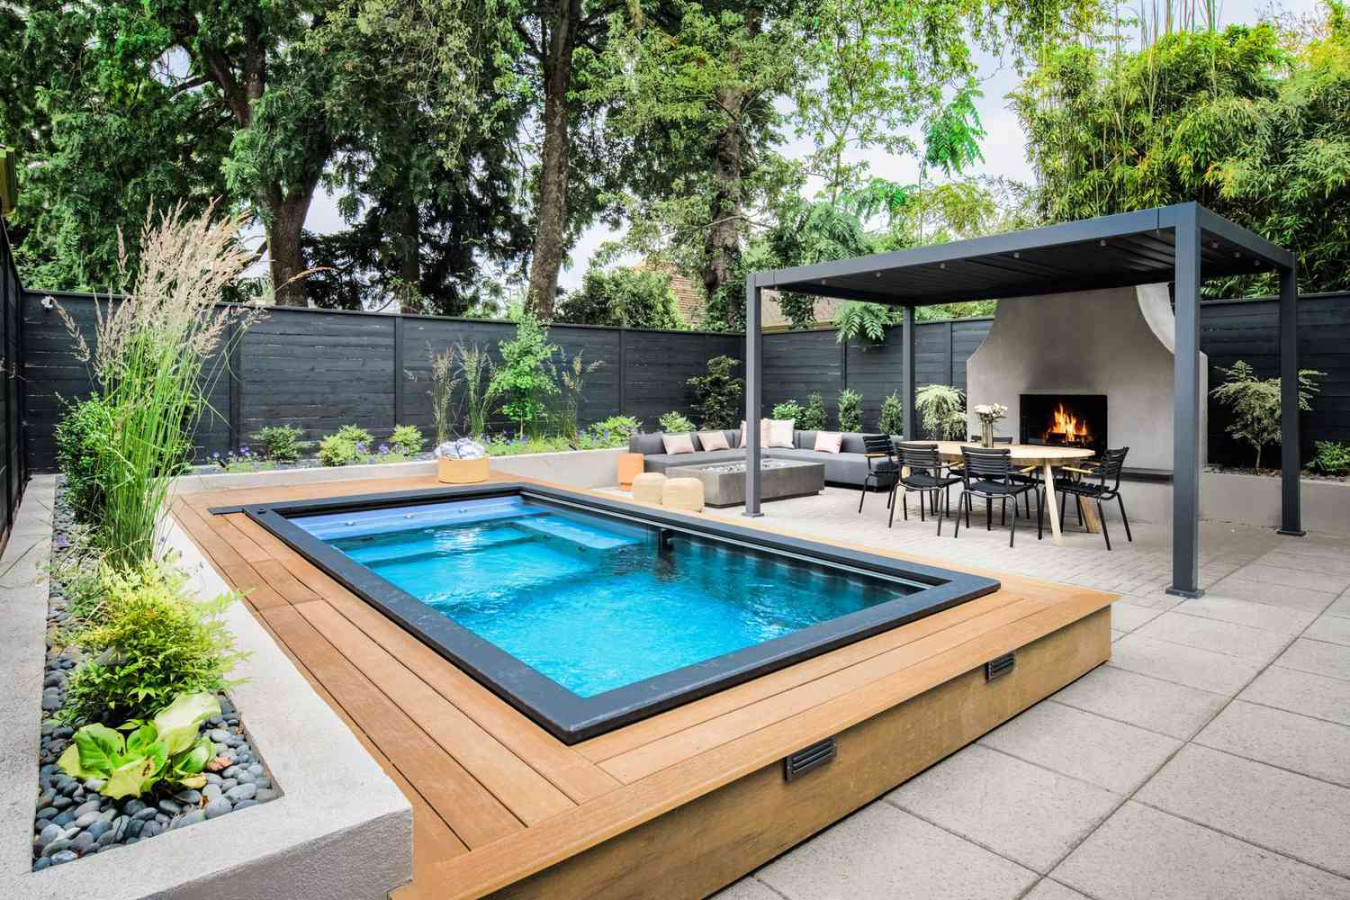 Trending and Totally Fun Backyard Ideas to Enhance Your Space